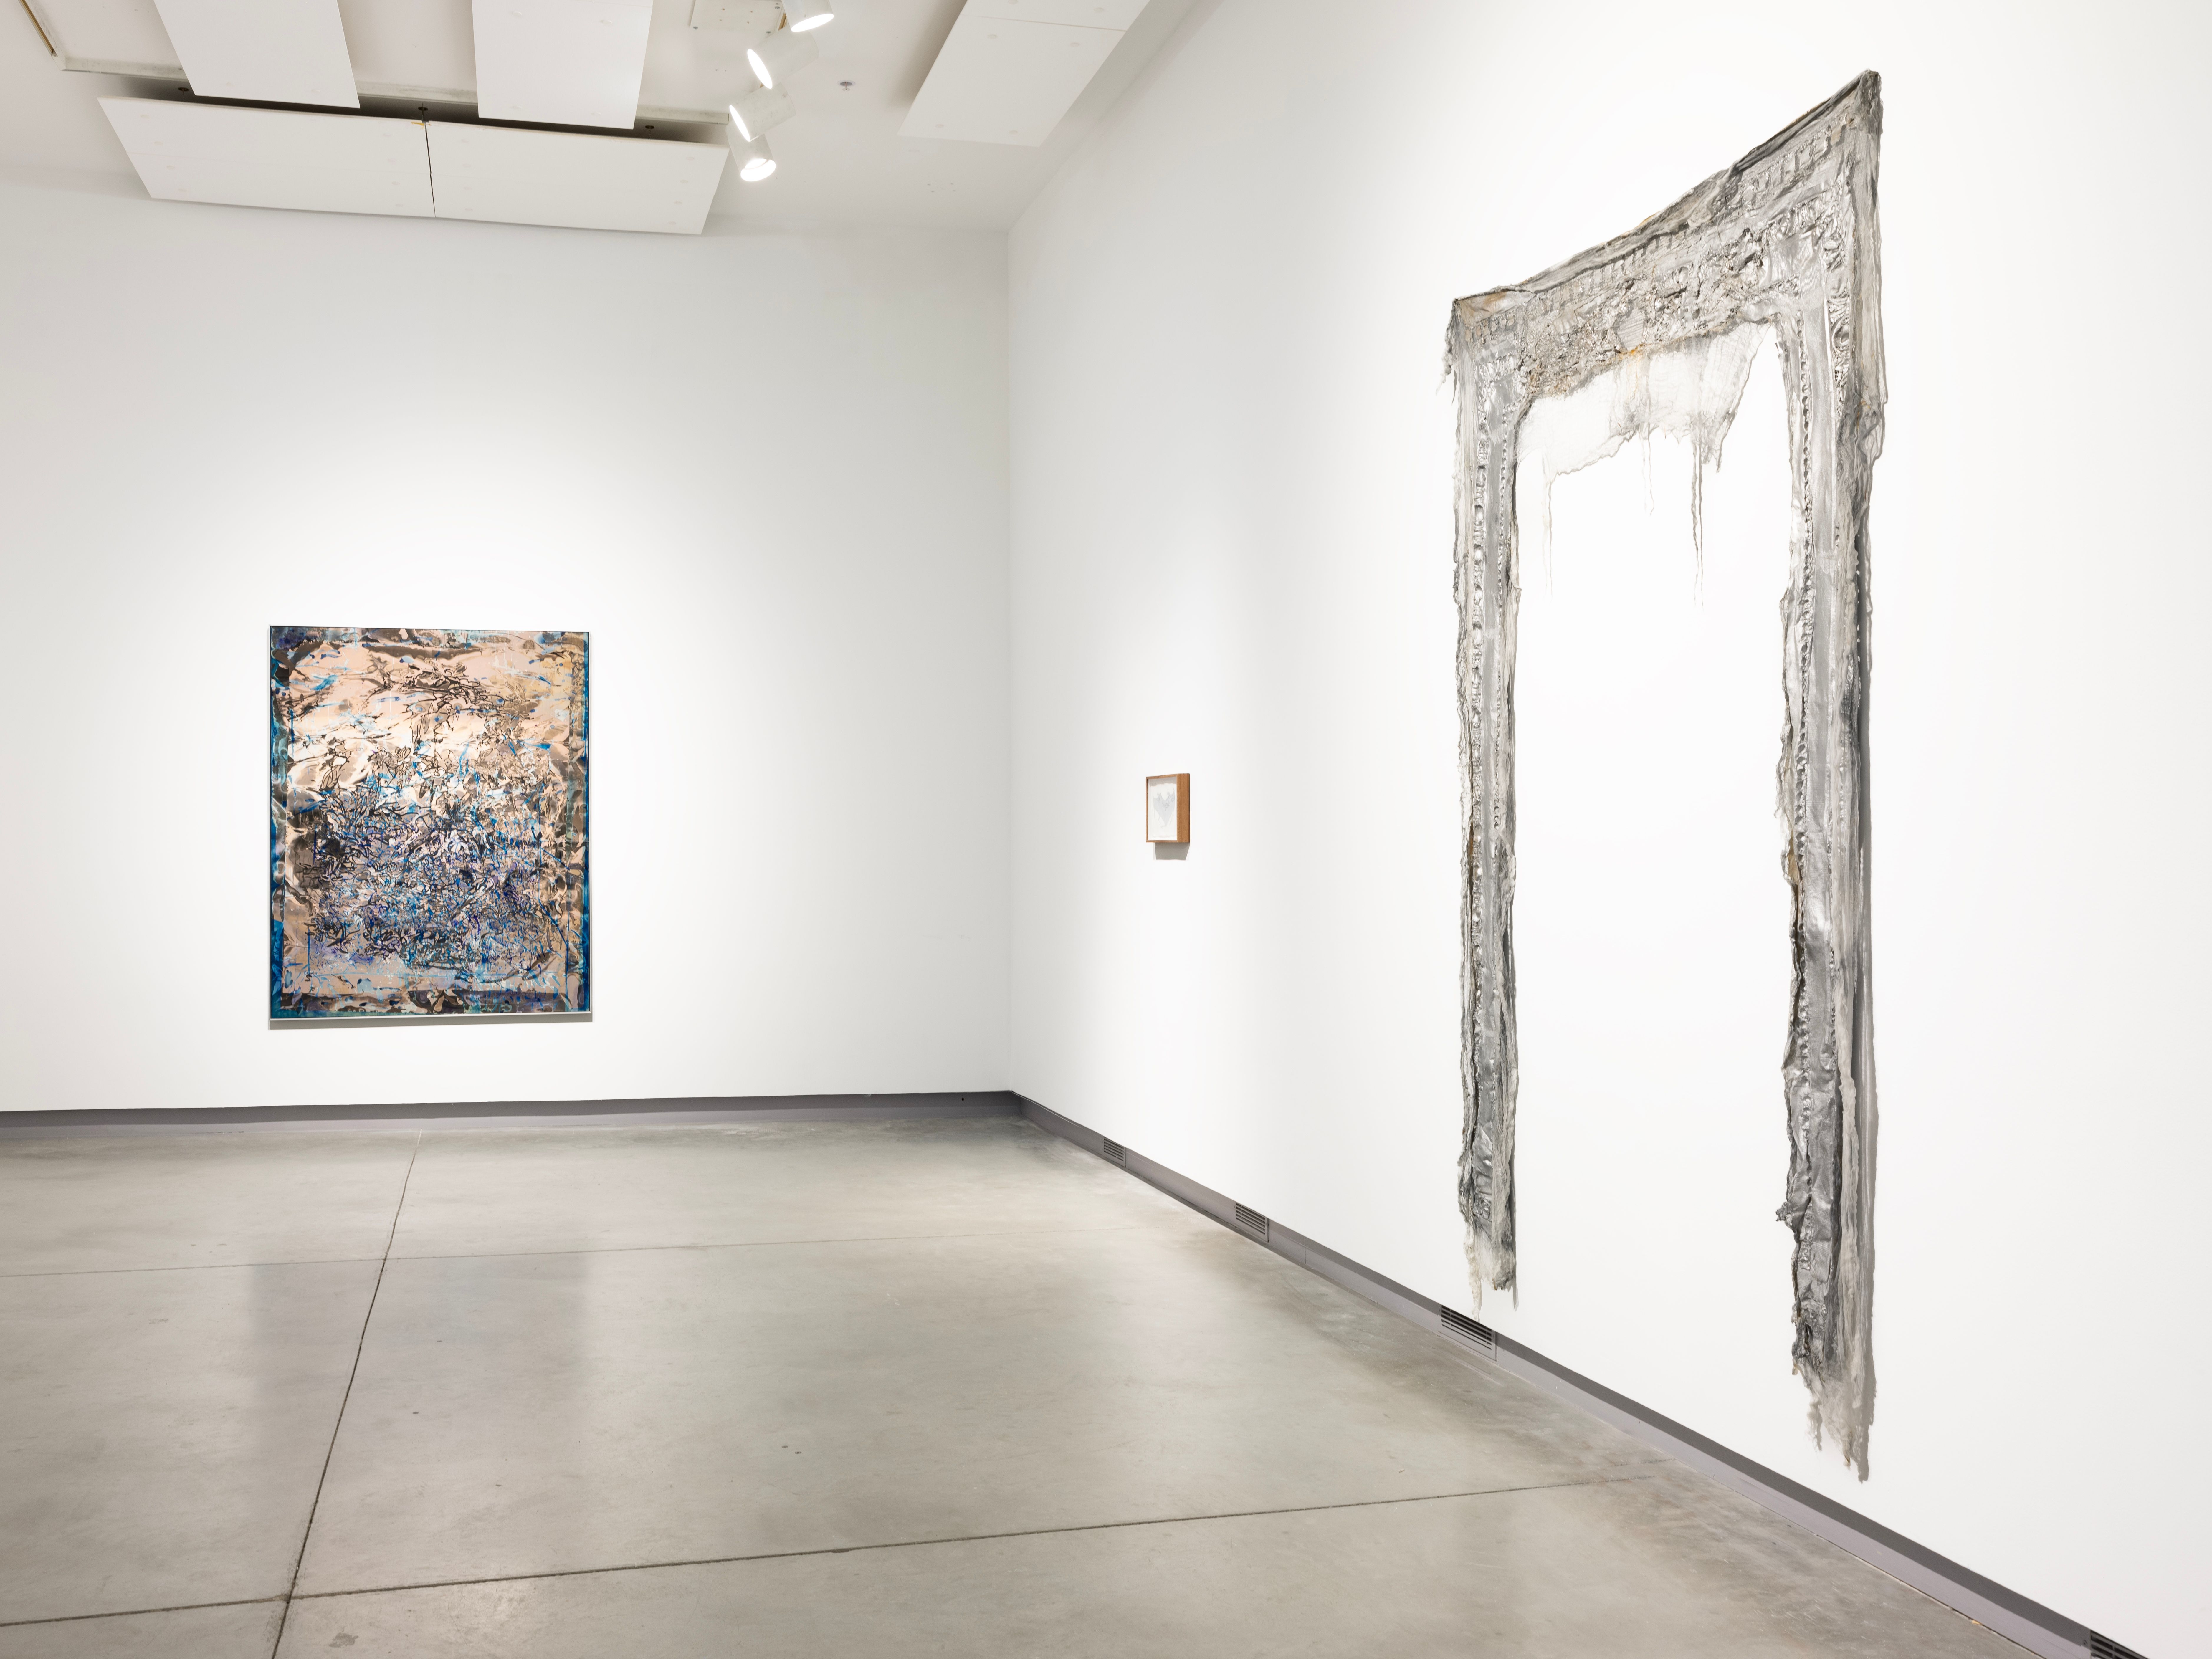 Installation view of ENTER: with three pieces, the left is a large dark painting, the middle is a small piece framed, the right is a metallic fabric hanging sculpture.